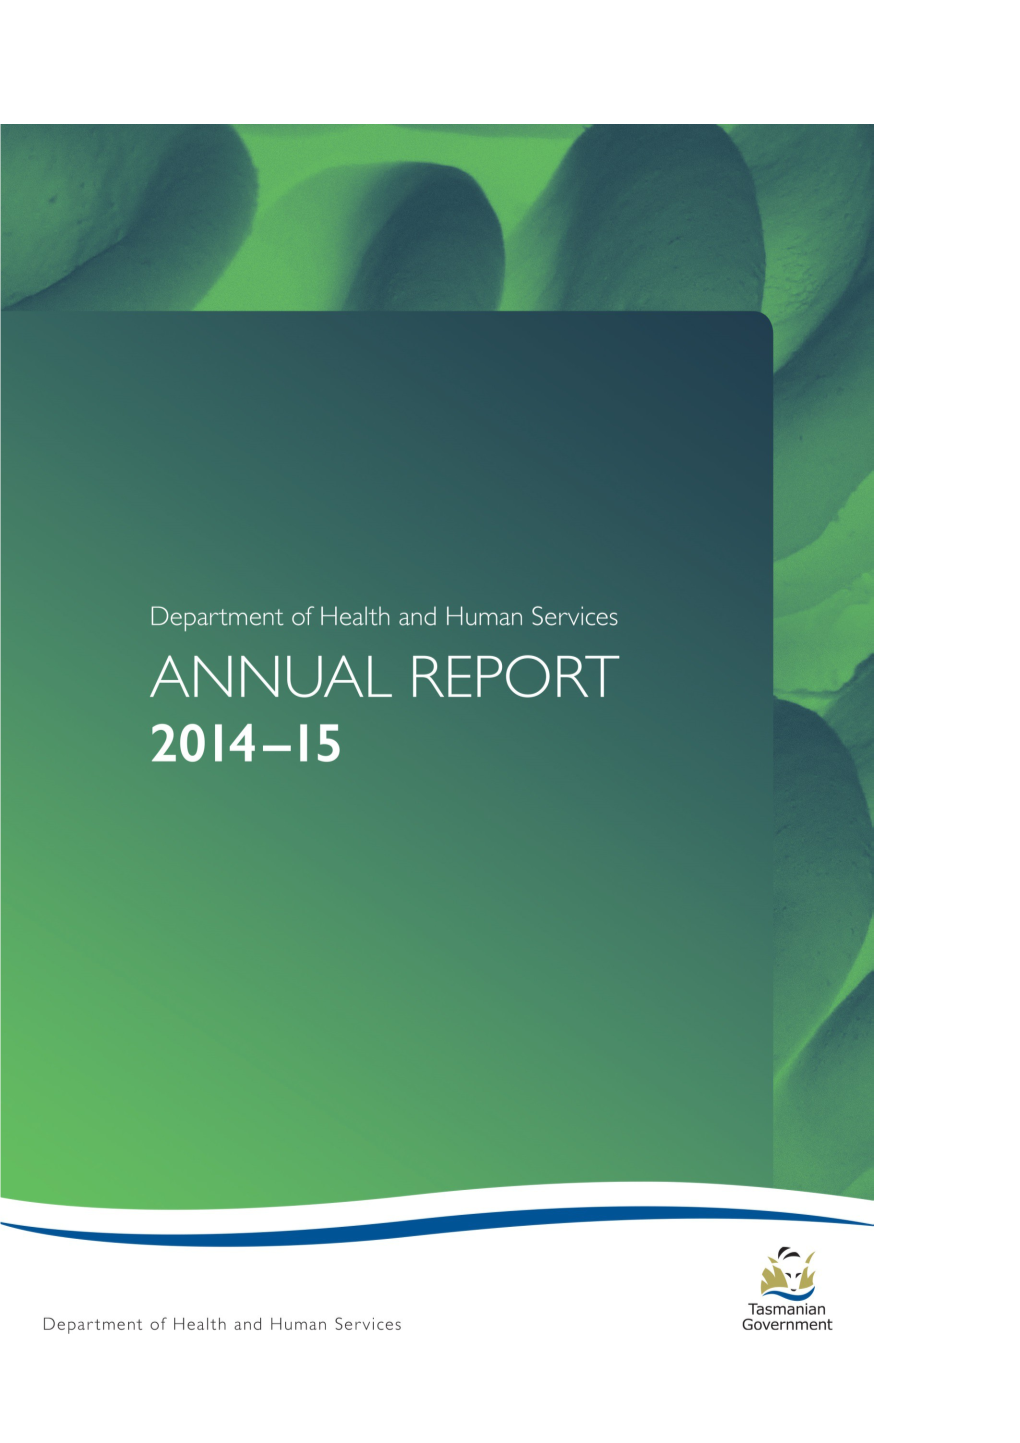 Department of Health and Human Services Annual Report 2014-15